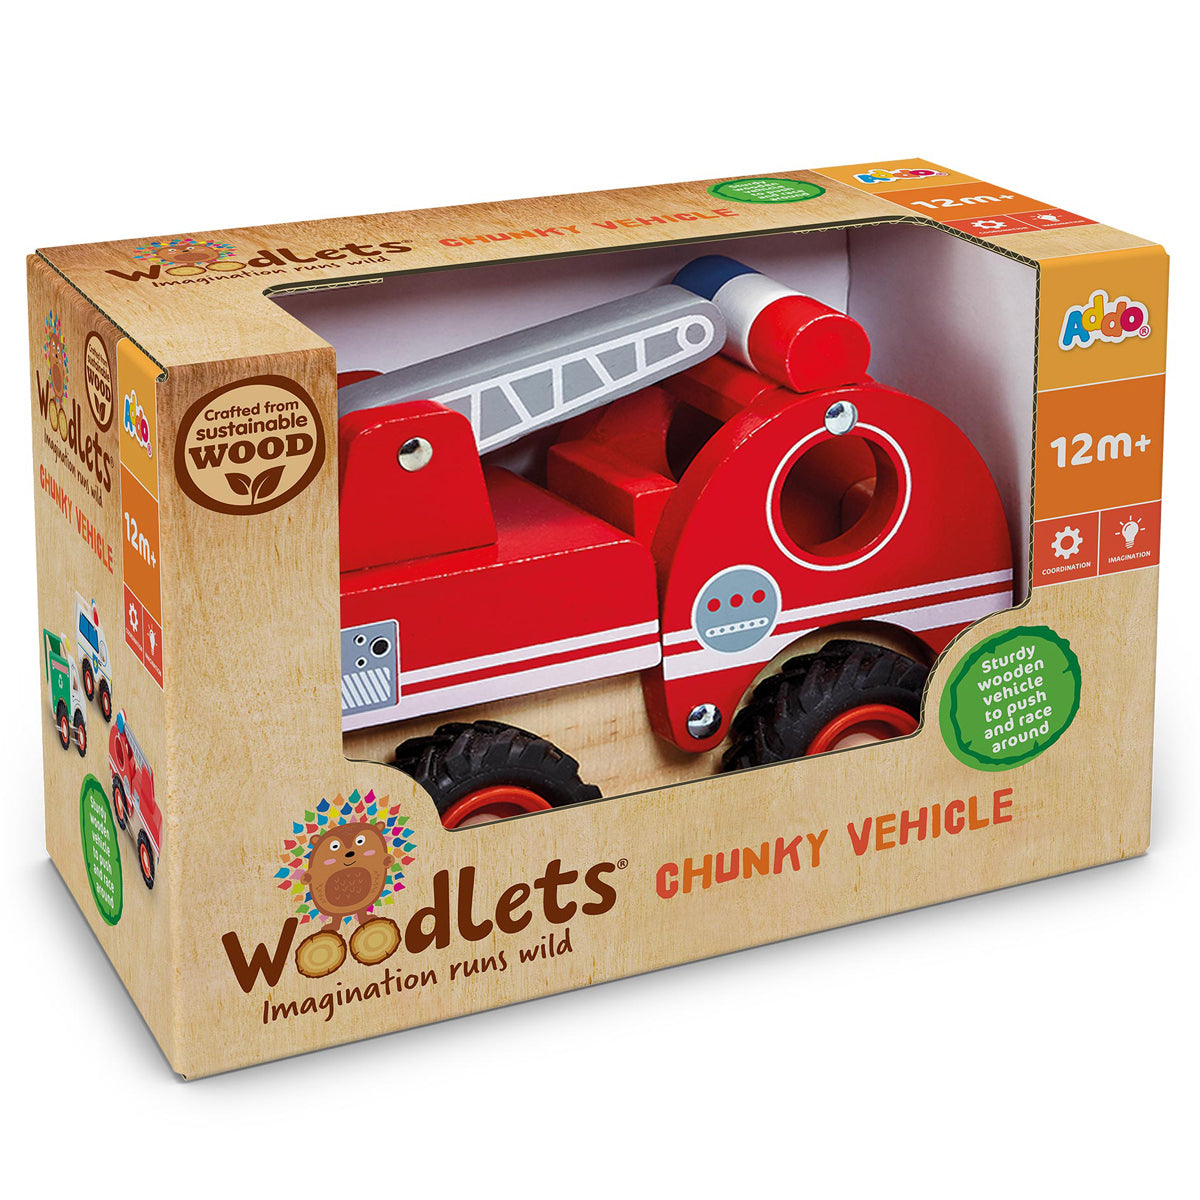 Woodlets Chunky Vehicles (Styles Vary - One Supplied)